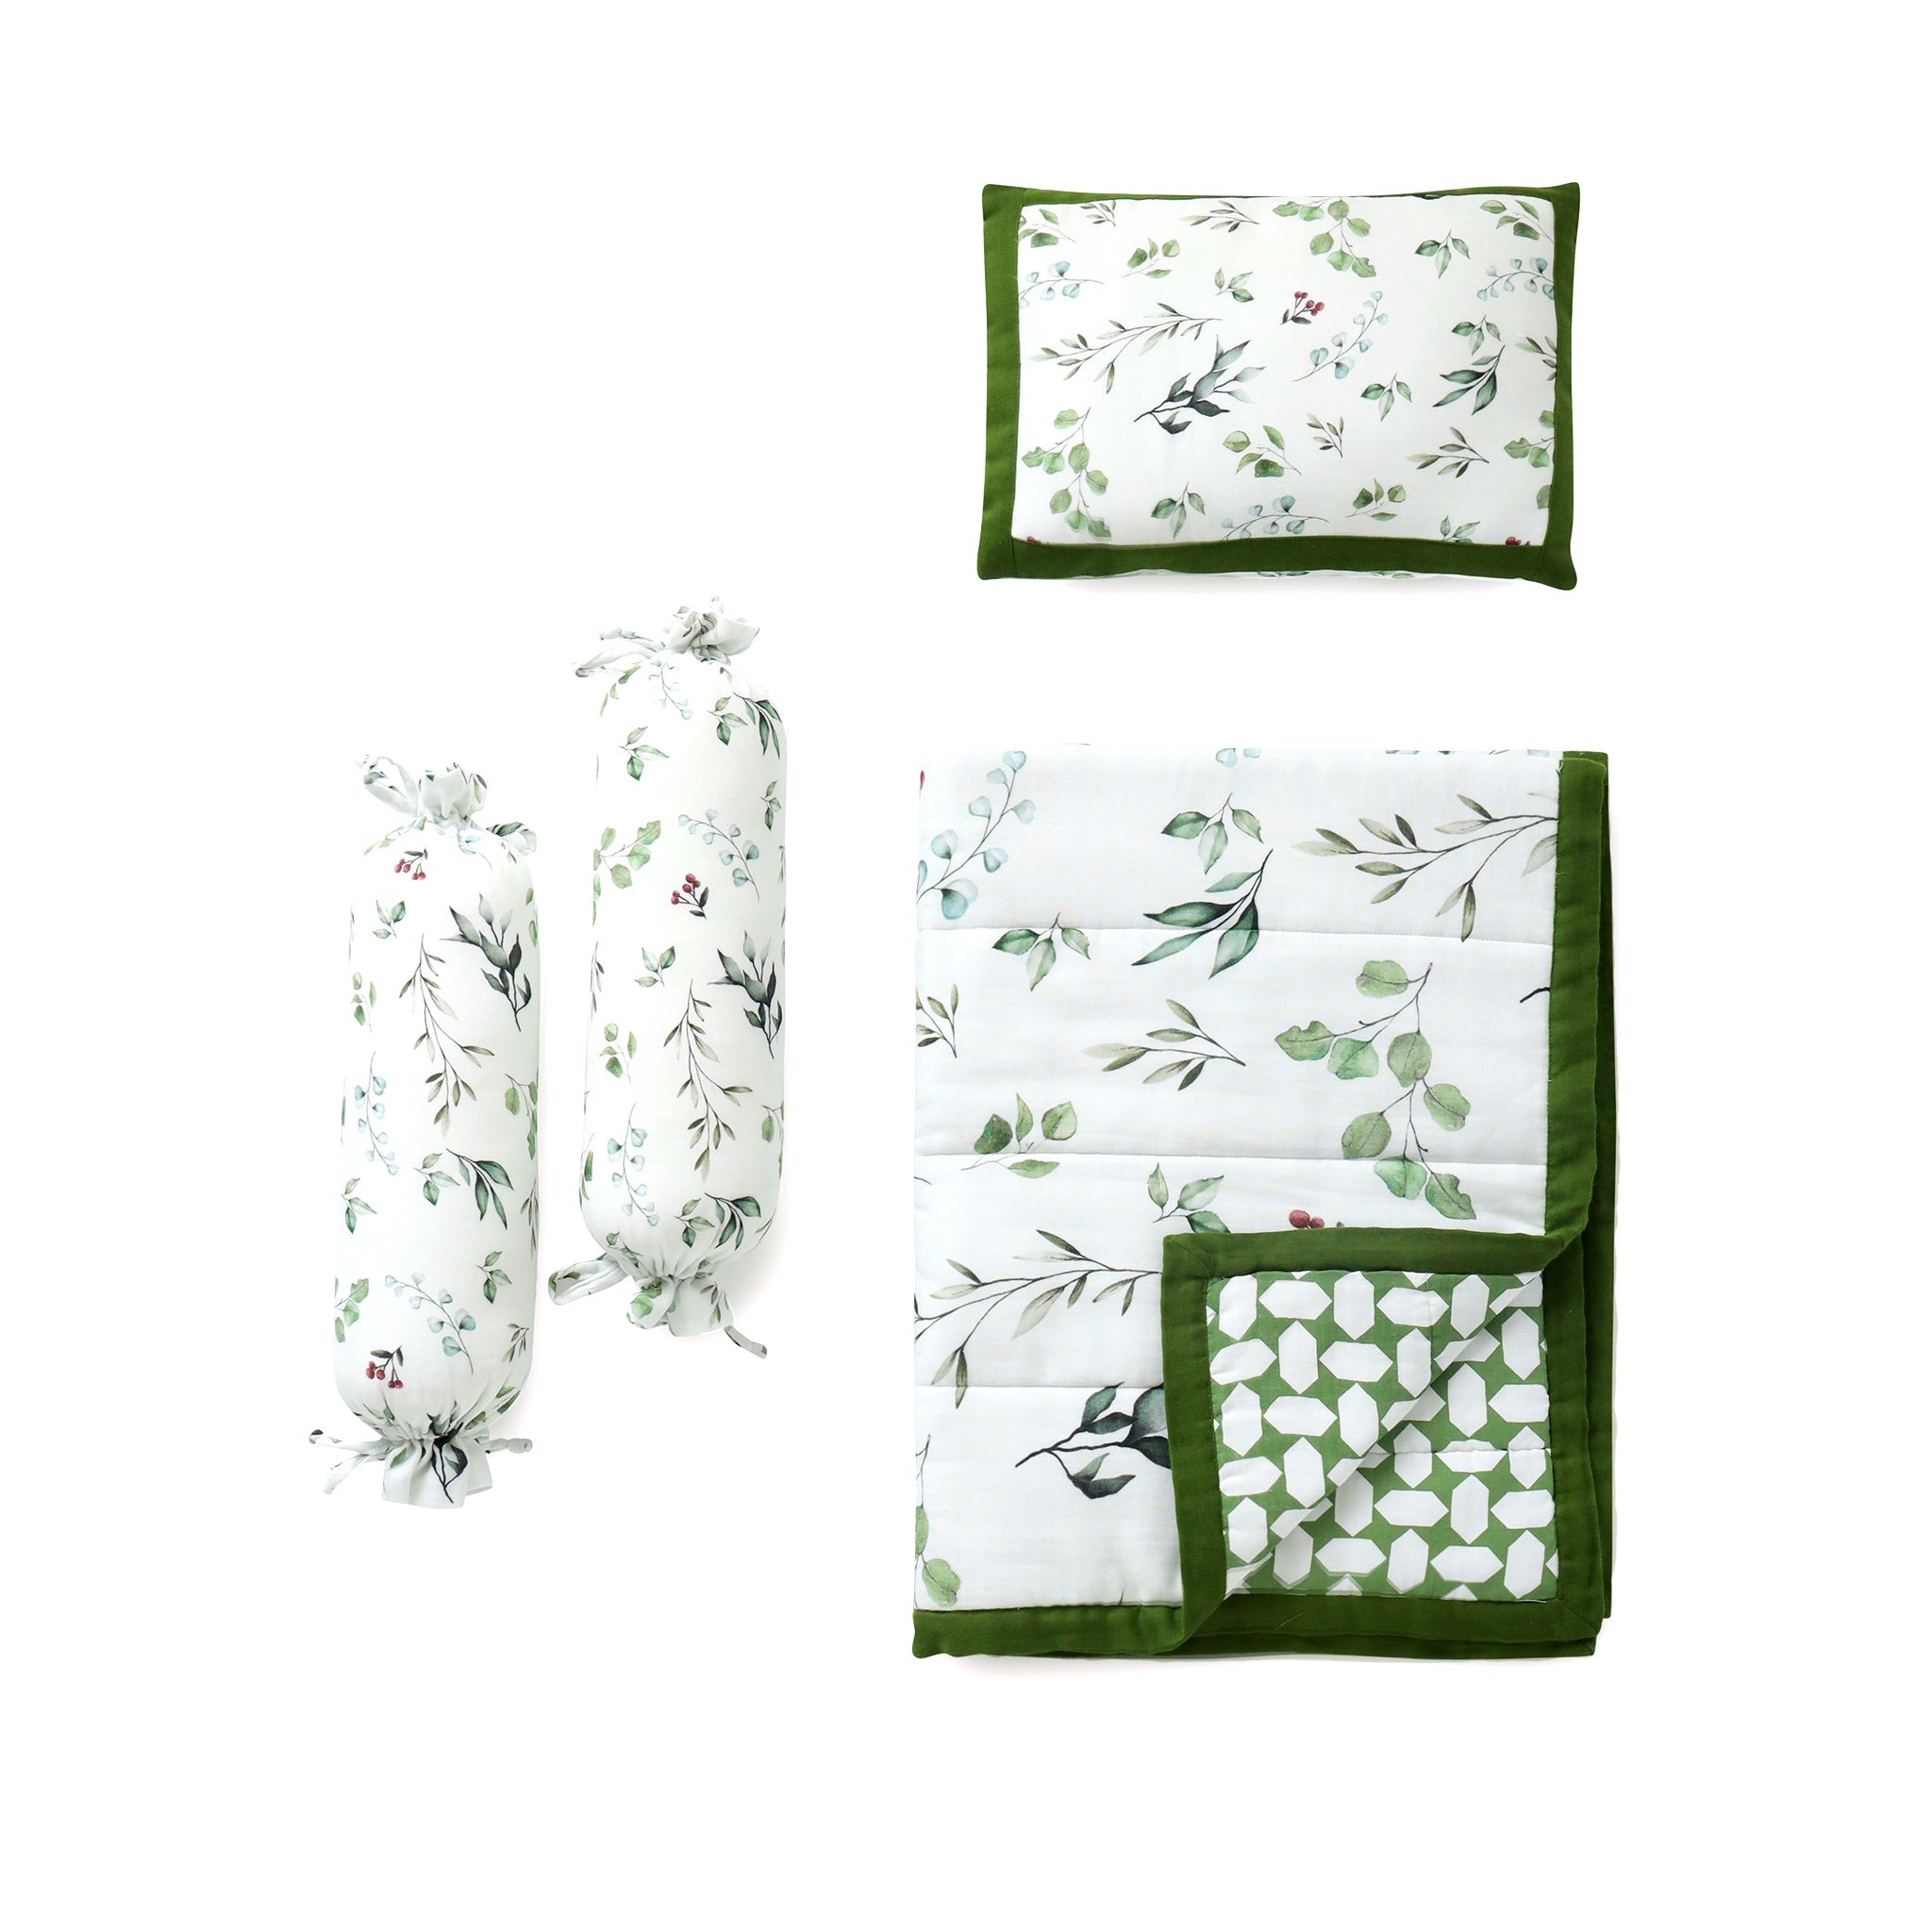 Spring Field Muslin Cot Bedding Set - Lil Mulberry